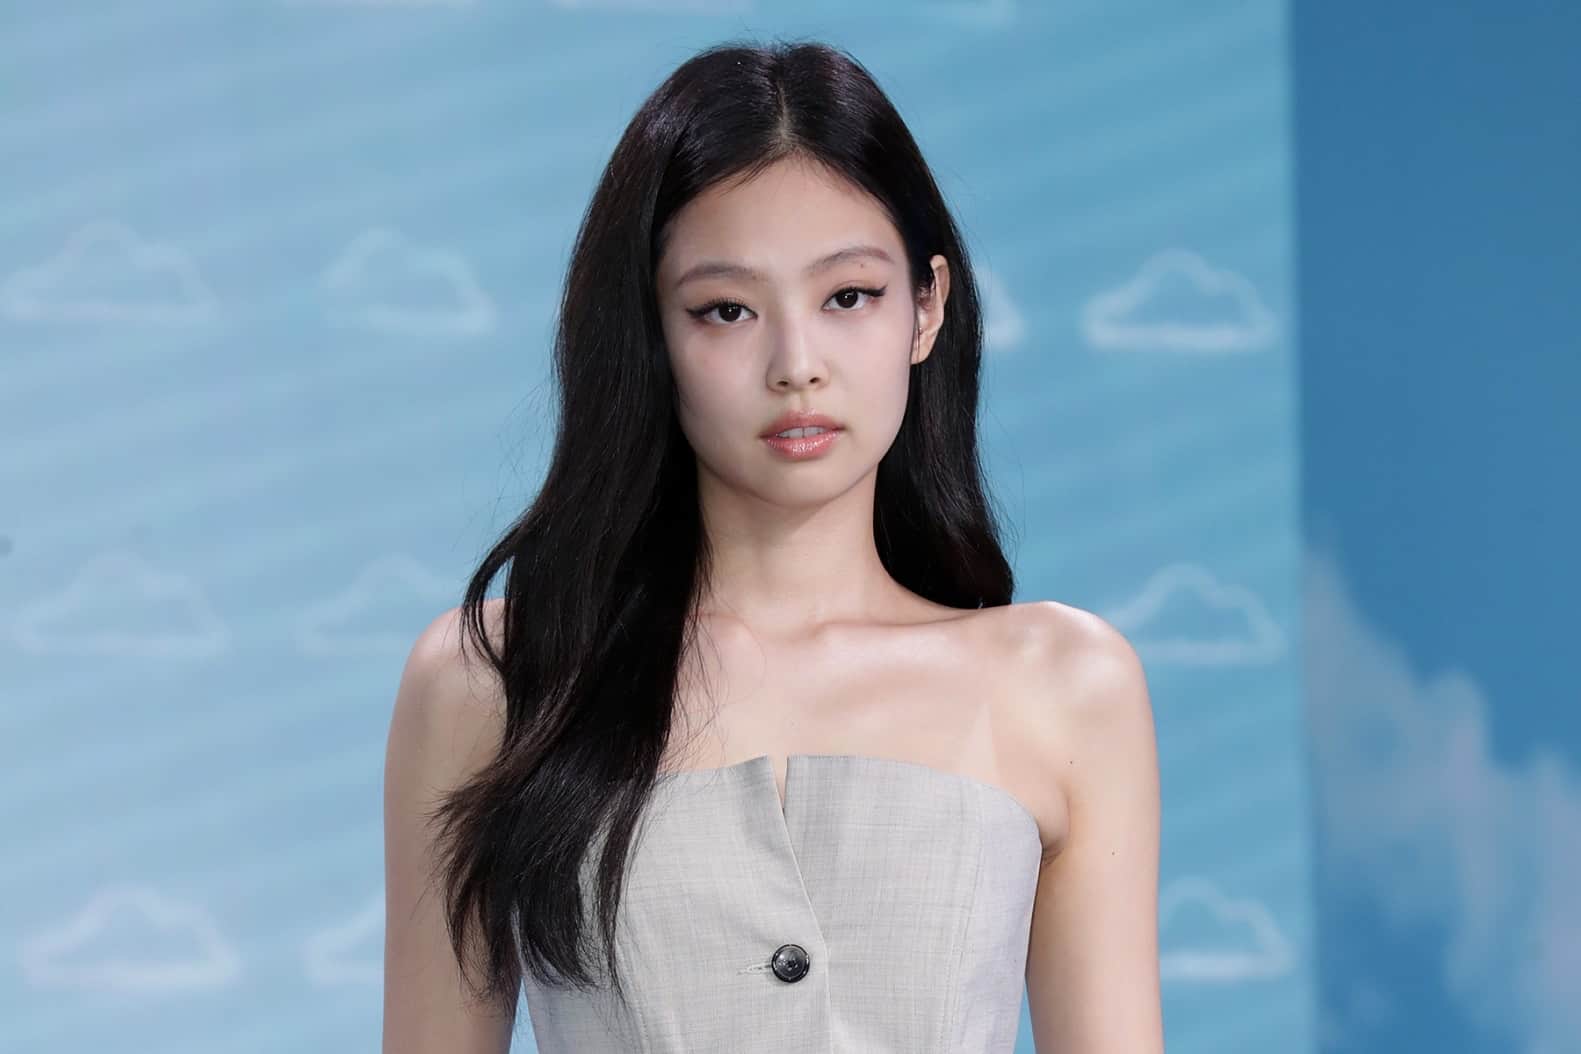 Why Jennie kim left the stage in their concert